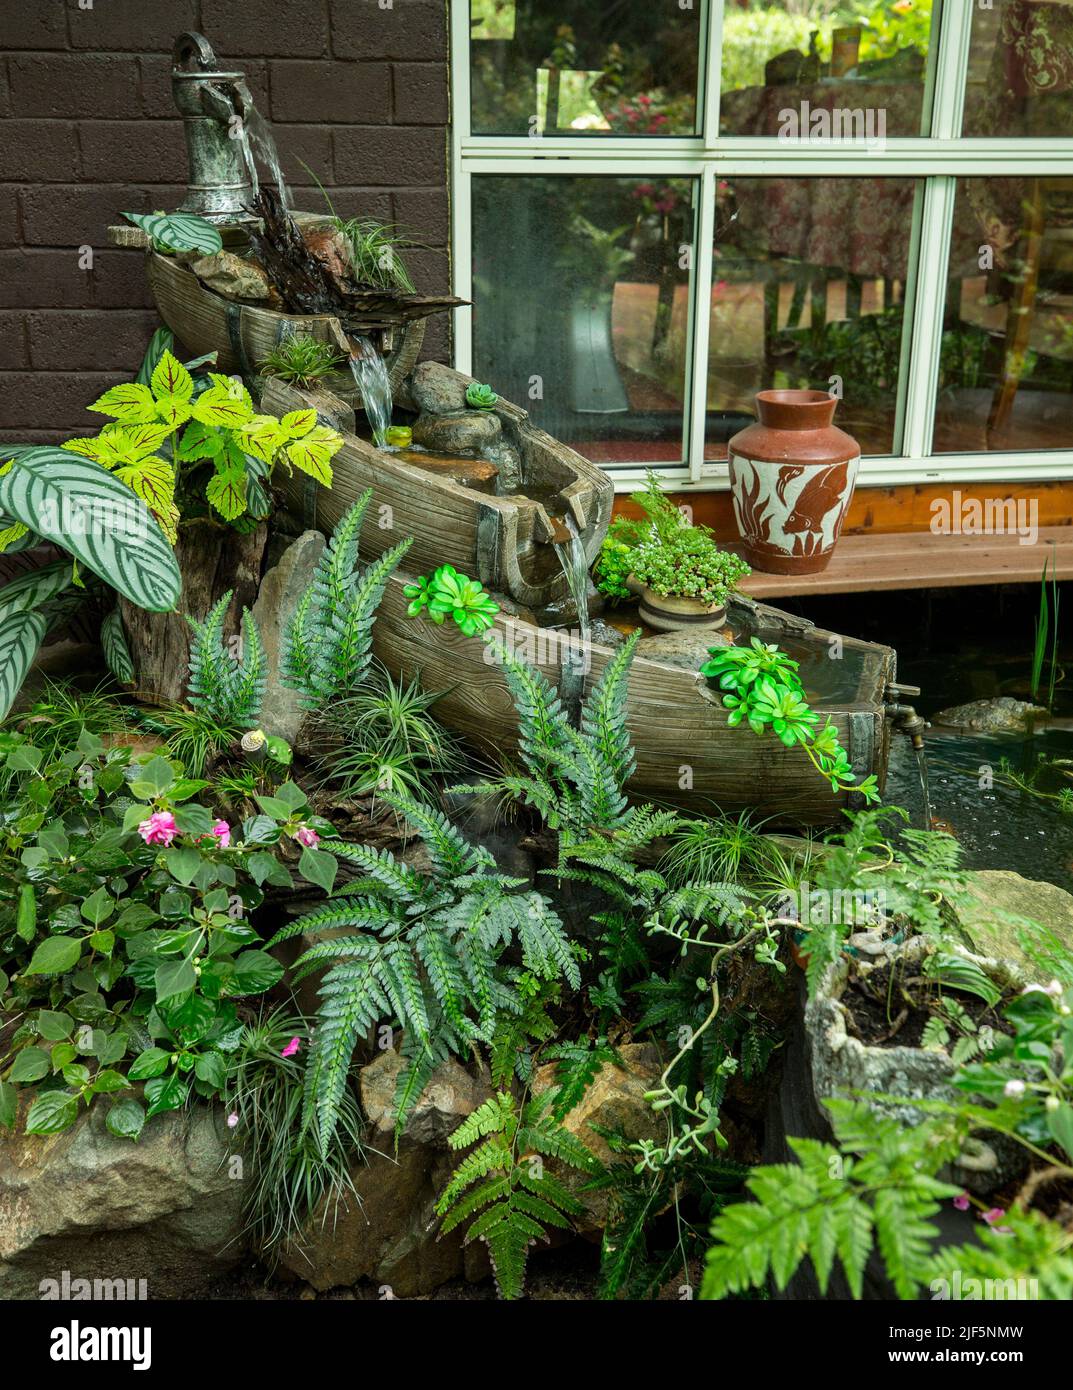 Unusual garden water feature, waterfall made from old wooden barrels surrounded by a rockery with emerald green ferns and other plants Stock Photo